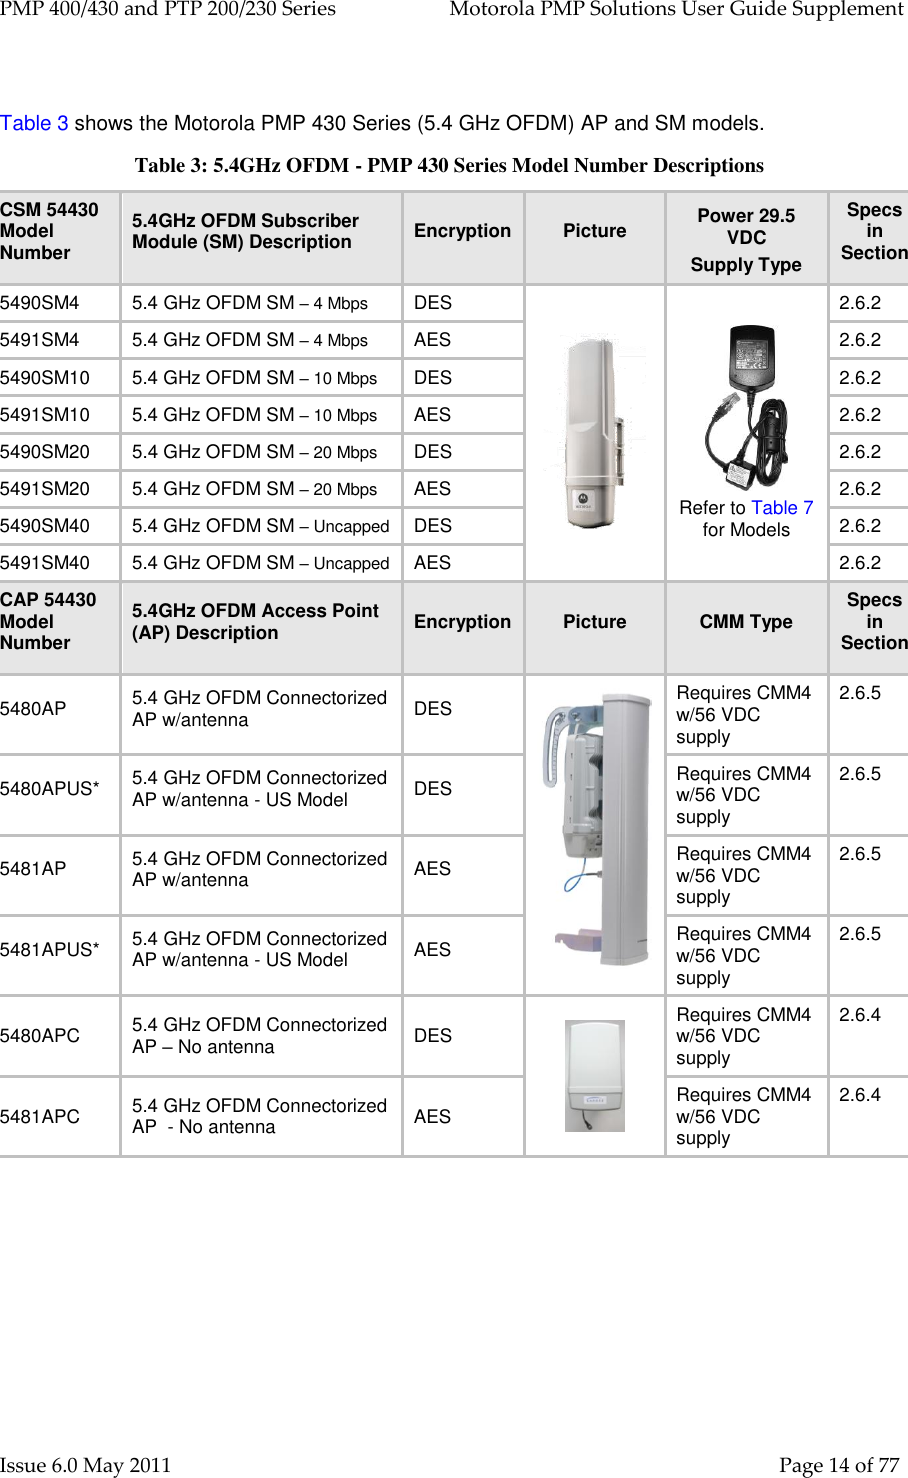 PMP 400/430 and PTP 200/230 Series   Motorola PMP Solutions User Guide Supplement Issue 6.0 May 2011    Page 14 of 77  Table 3 shows the Motorola PMP 430 Series (5.4 GHz OFDM) AP and SM models. Table 3: 5.4GHz OFDM - PMP 430 Series Model Number Descriptions CSM 54430 Model Number 5.4GHz OFDM Subscriber Module (SM) Description Encryption Picture Power 29.5 VDC Supply Type Specs in Section 5490SM4 5.4 GHz OFDM SM – 4 Mbps DES   Refer to Table 7 for Models 2.6.2 5491SM4 5.4 GHz OFDM SM – 4 Mbps AES 2.6.2 5490SM10 5.4 GHz OFDM SM – 10 Mbps DES 2.6.2 5491SM10 5.4 GHz OFDM SM – 10 Mbps AES 2.6.2 5490SM20 5.4 GHz OFDM SM – 20 Mbps DES 2.6.2 5491SM20 5.4 GHz OFDM SM – 20 Mbps AES 2.6.2 5490SM40 5.4 GHz OFDM SM – Uncapped DES 2.6.2 5491SM40 5.4 GHz OFDM SM – Uncapped AES 2.6.2 CAP 54430 Model Number 5.4GHz OFDM Access Point (AP) Description Encryption Picture CMM Type Specs in Section 5480AP 5.4 GHz OFDM Connectorized AP w/antenna DES  Requires CMM4 w/56 VDC supply 2.6.5 5480APUS* 5.4 GHz OFDM Connectorized AP w/antenna - US Model DES Requires CMM4 w/56 VDC supply 2.6.5 5481AP 5.4 GHz OFDM Connectorized AP w/antenna AES Requires CMM4 w/56 VDC supply 2.6.5 5481APUS* 5.4 GHz OFDM Connectorized AP w/antenna - US Model AES Requires CMM4 w/56 VDC supply 2.6.5 5480APC 5.4 GHz OFDM Connectorized AP – No antenna DES  Requires CMM4 w/56 VDC supply 2.6.4 5481APC 5.4 GHz OFDM Connectorized AP  - No antenna AES Requires CMM4 w/56 VDC supply 2.6.4      